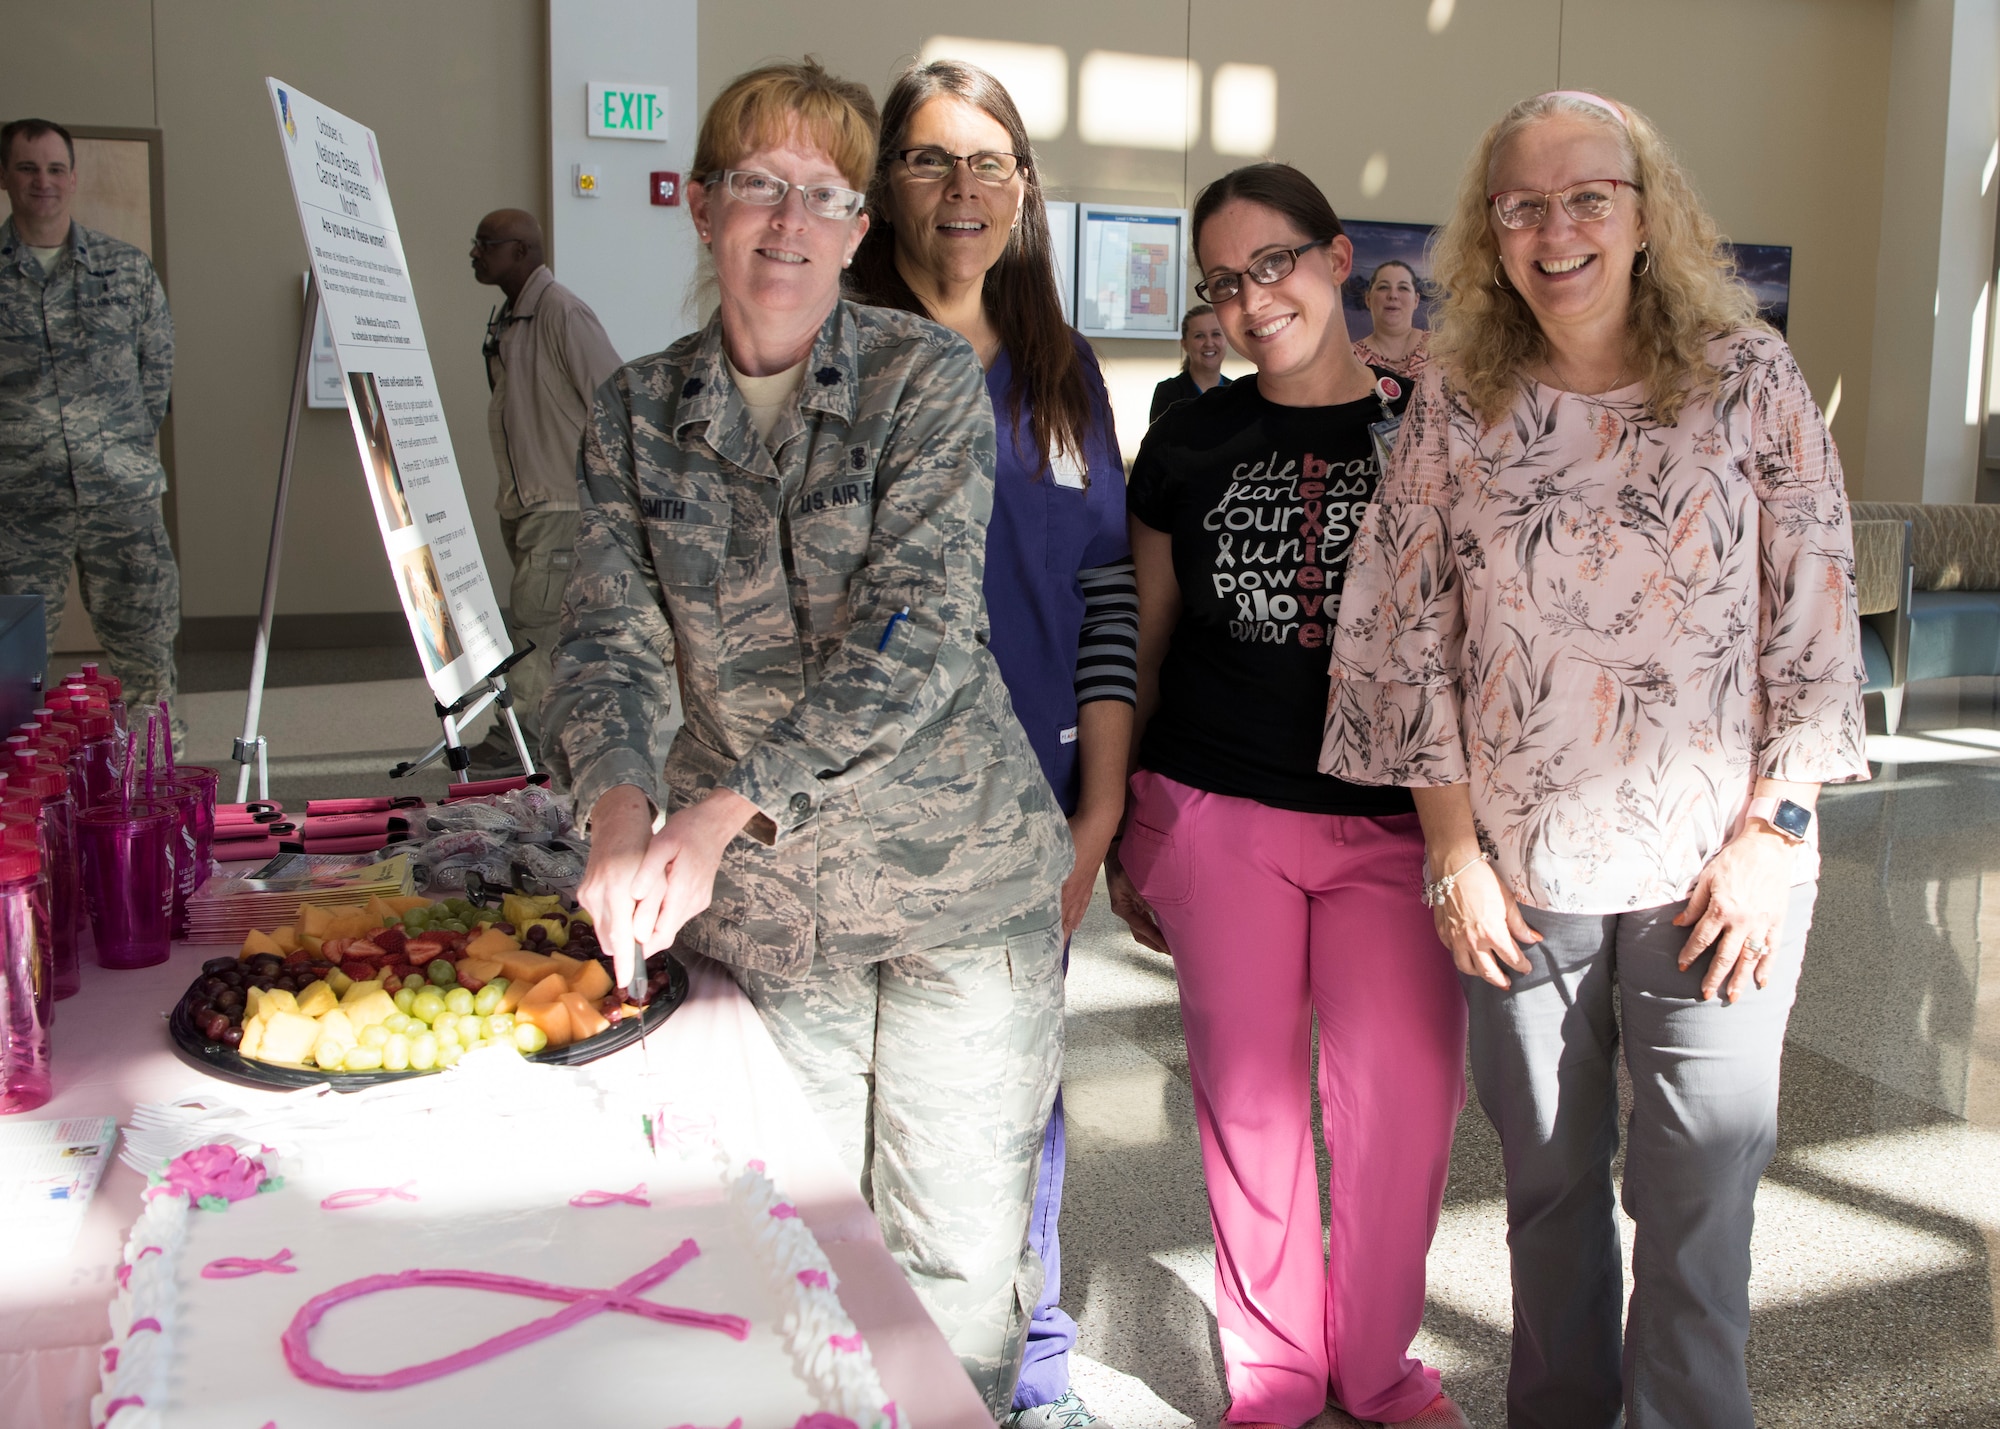 (From left to right) Lt. Col. Debra Smith, 49th Medical Group women’s health element chief; Deborah Dolly, 49 MDG disease manager; Felicia Moore, 49 MDG disease manager; and Juli Bailey, 49 MDG health promotion coordinator, pose for a photo during the 49 MDG Breast Cancer Awareness Month Celebration October 25, 2018, at Holloman Air Force Base, N.M. October is Breast Cancer Awareness Month, and is dedicated to educating the public about breast cancer, how to prevent it and what treatments are available. (U.S. Air Force photo by Staff Sgt. BreeAnn Sachs)